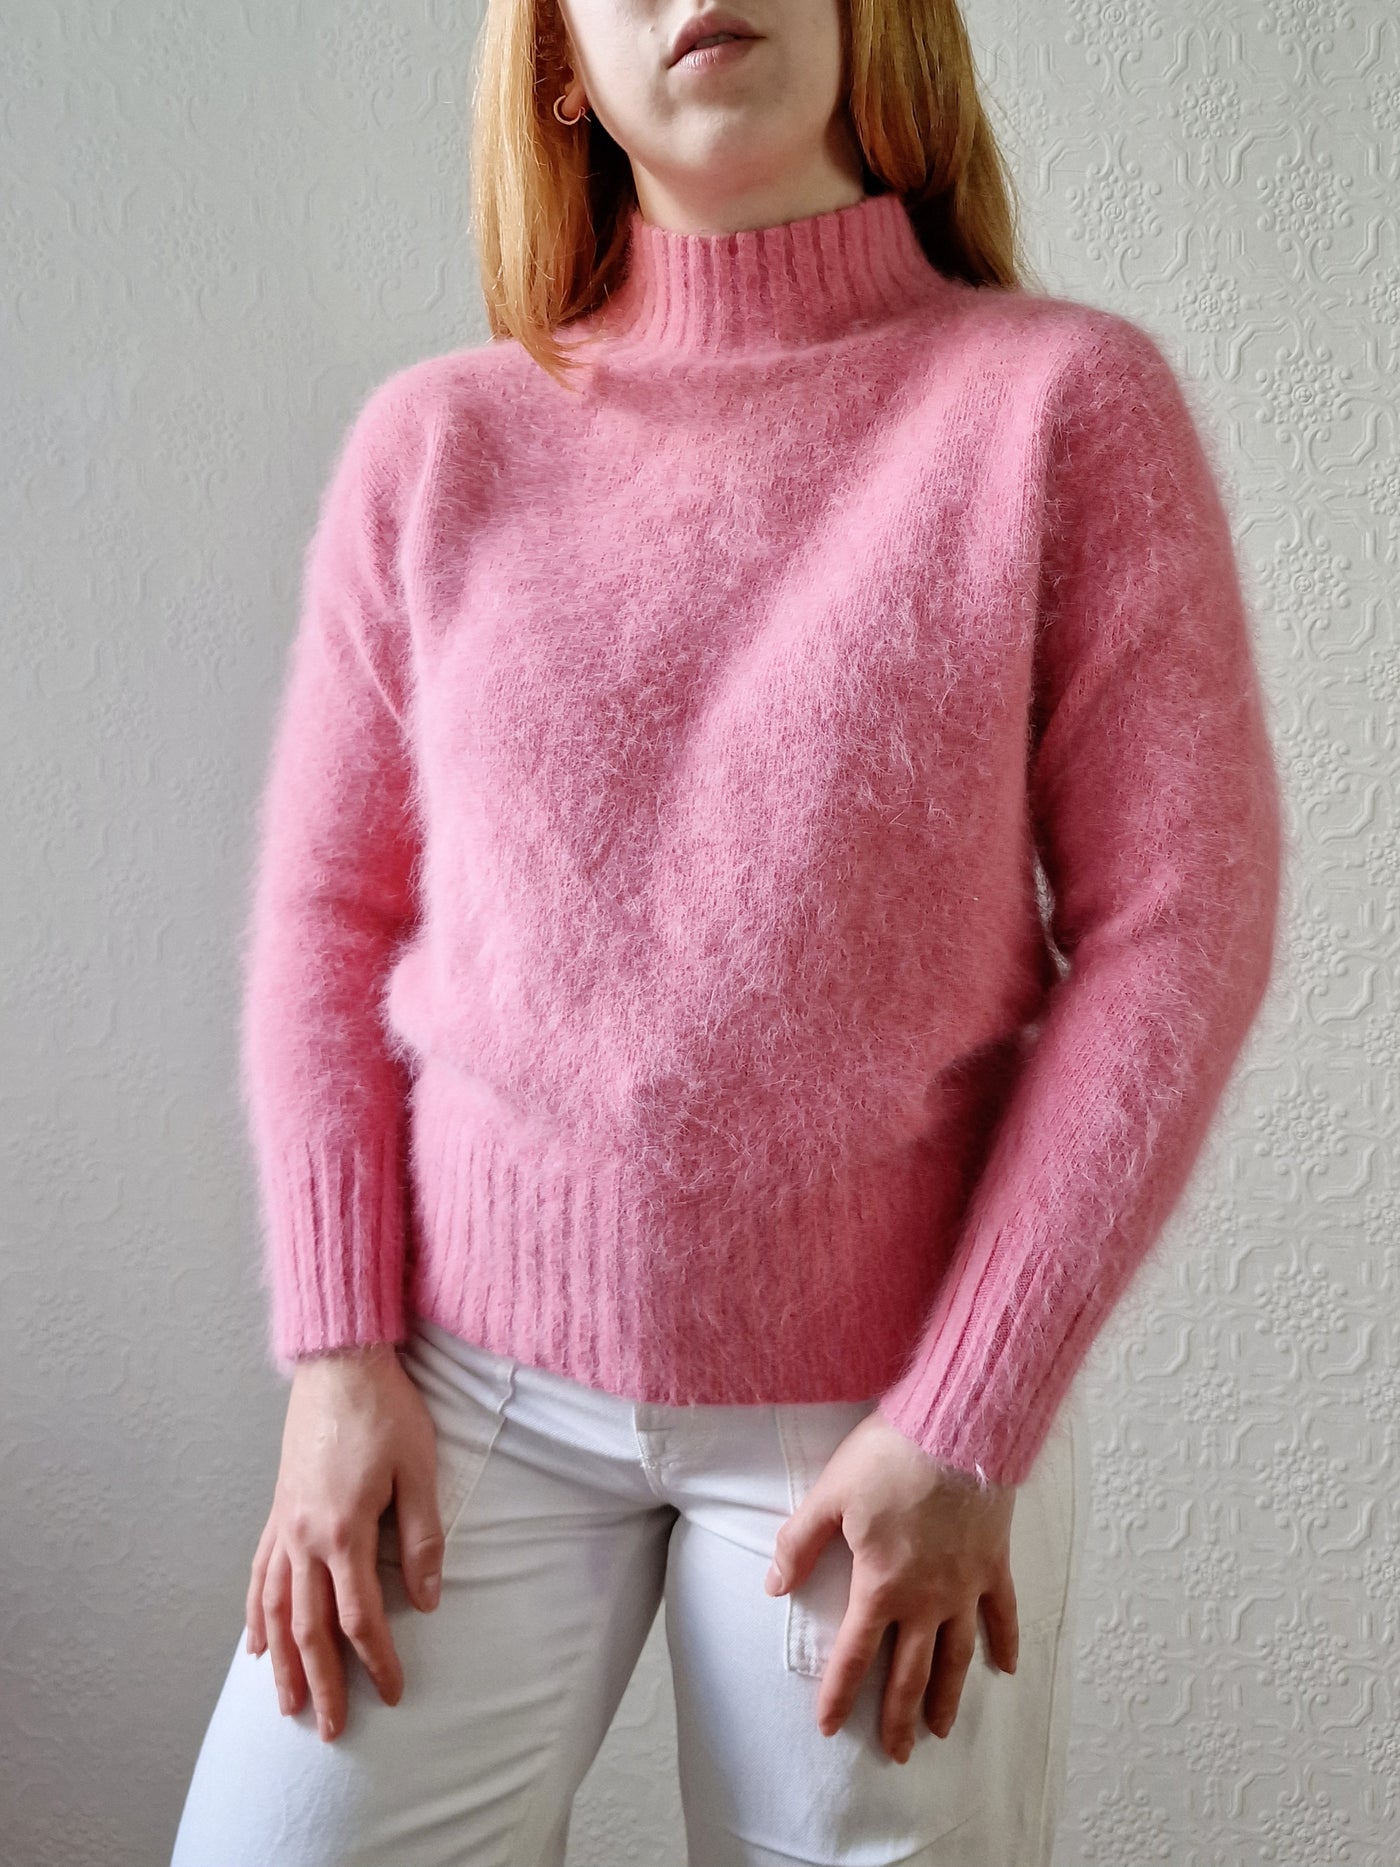 Vintage Pink Angora Jumper with High Neck - S